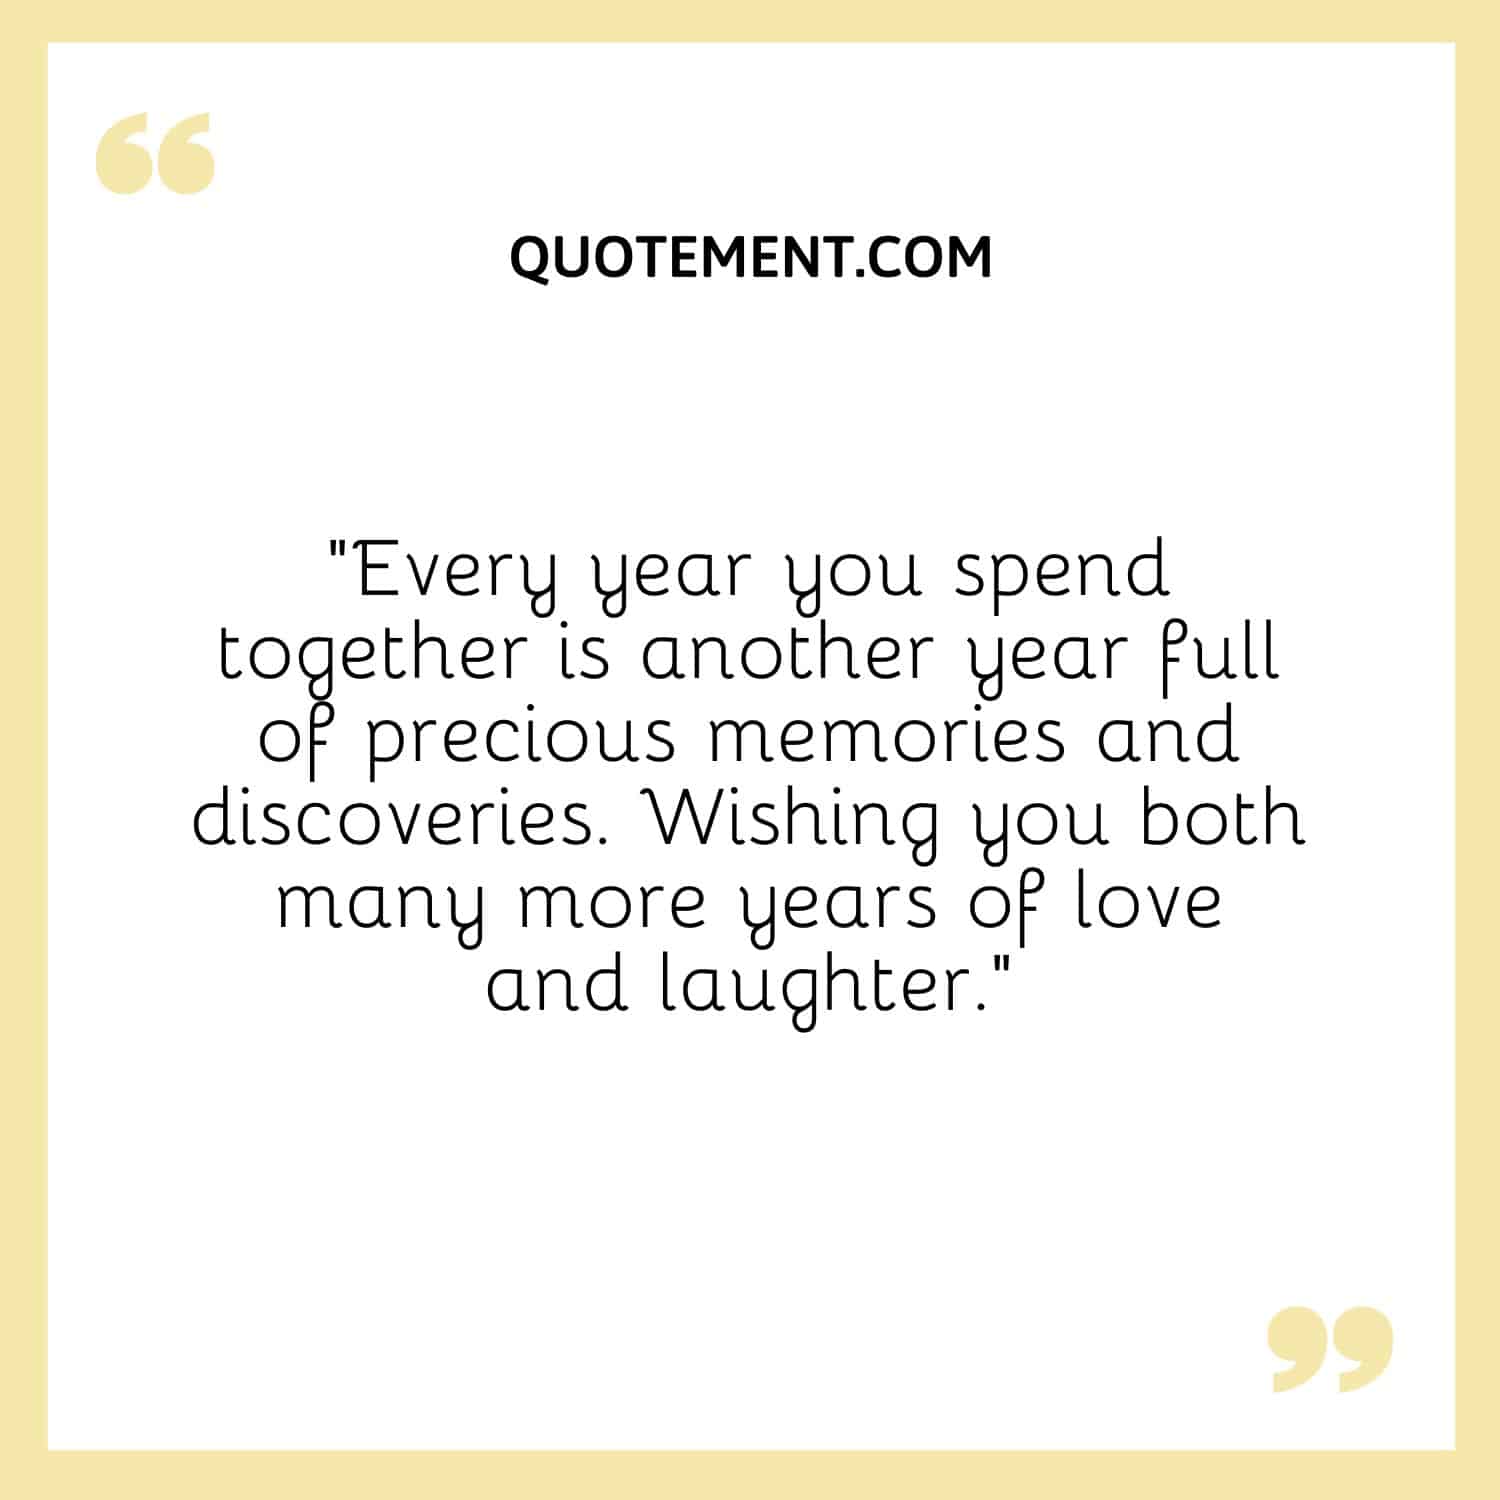 Every year you spend together is another year full of precious memories and discoveries